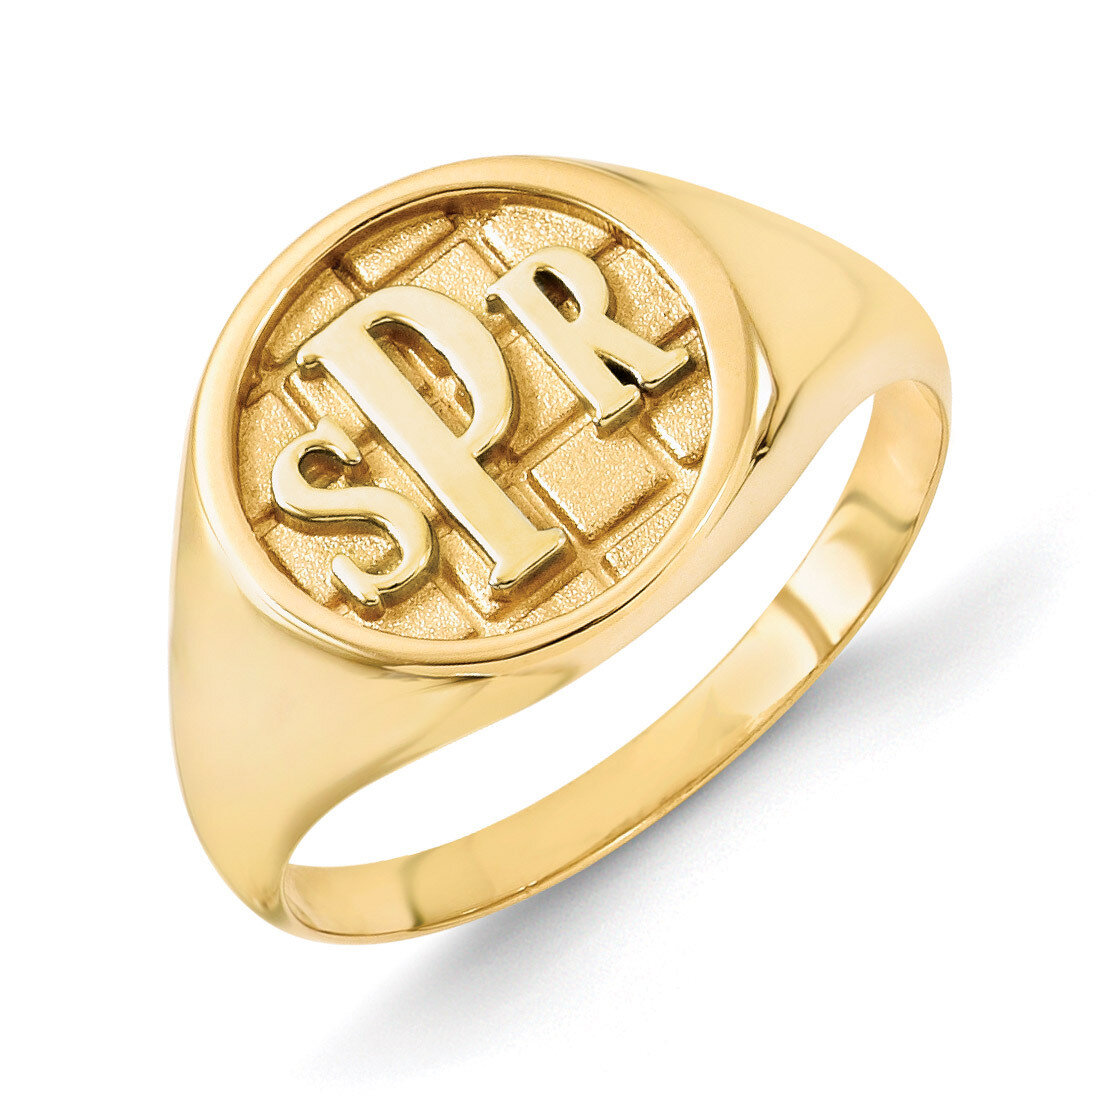 Monogram Signet Ring Gold-plated Sterling Silver XNR49GP